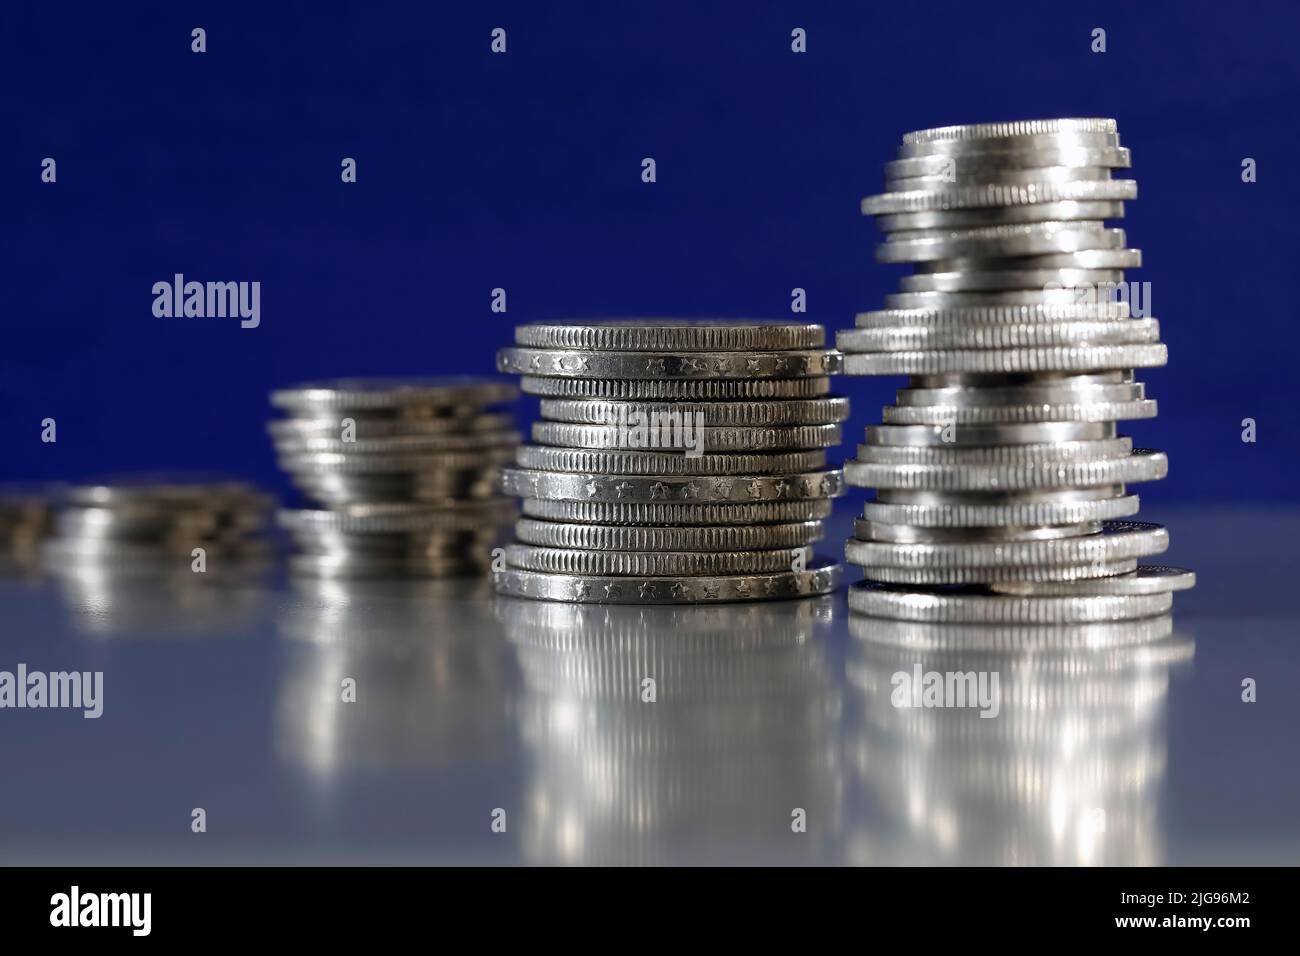 Here are four piles of coins which have been stacked on a grey, flat surface and on a dark blue background. Stock Photo